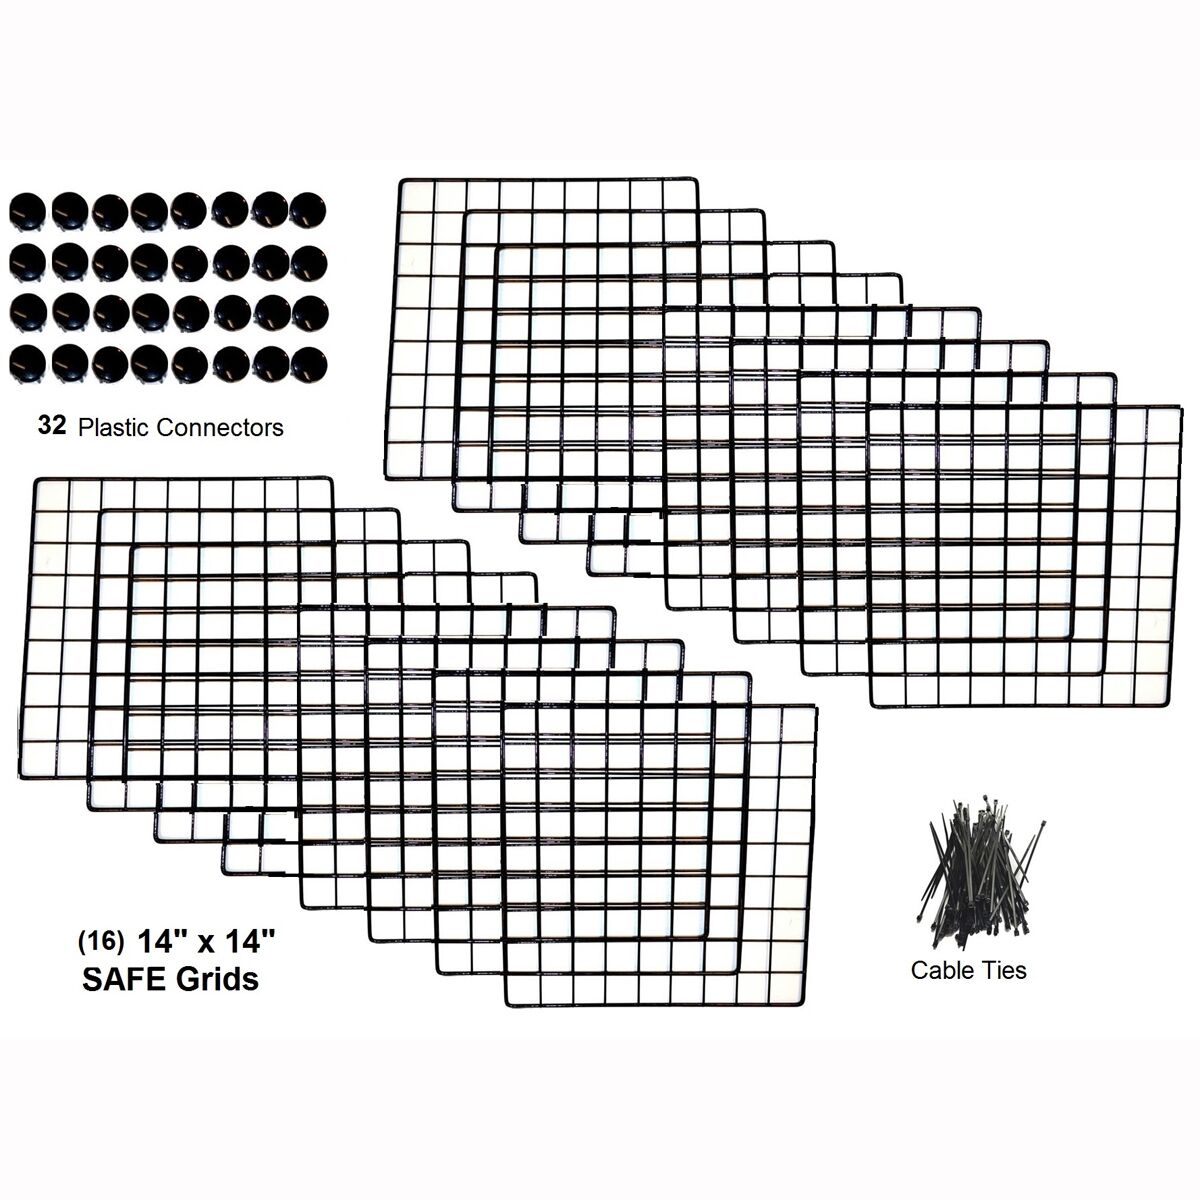 Cagetopia Jumbo grid pack for a 2x6 grid C&C guinea pig cage